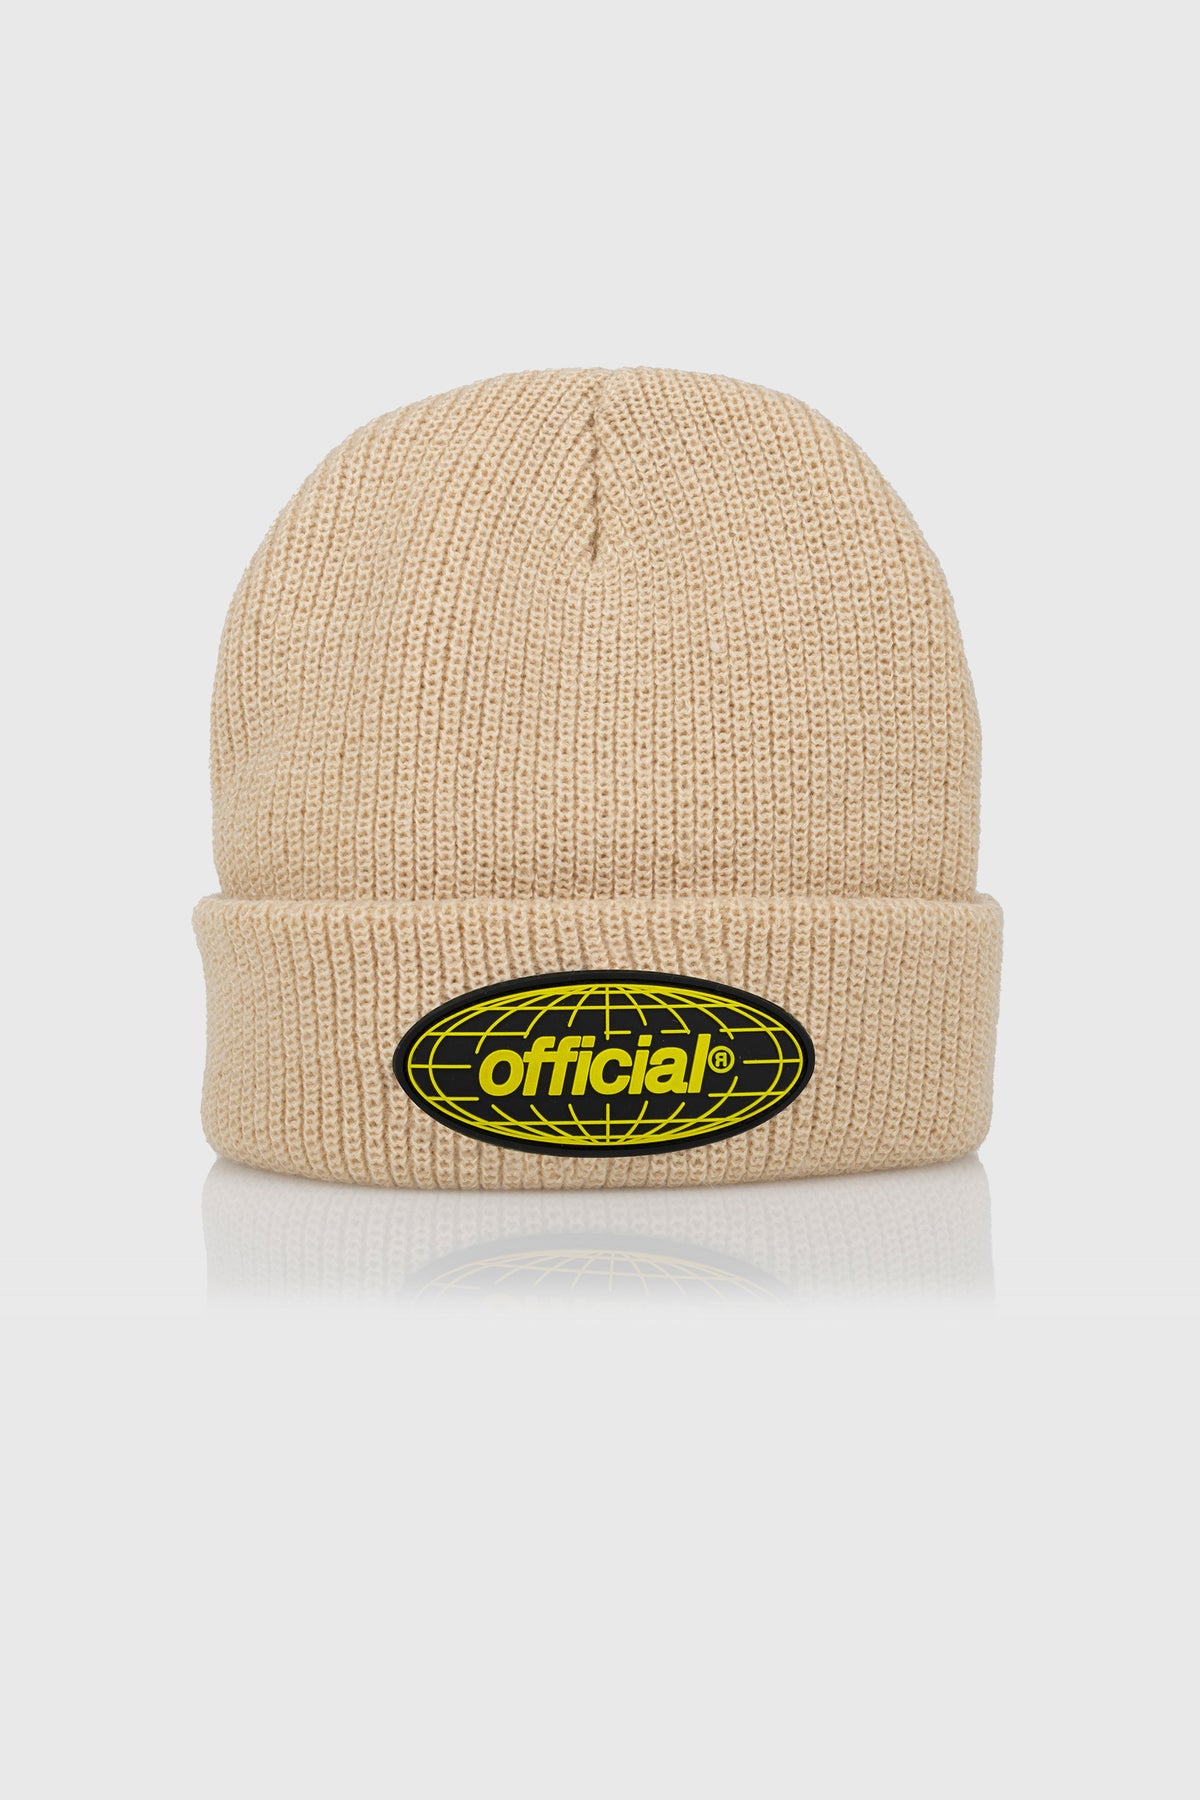 WRLD Takeover Beanie (Beige) – Official The Brand